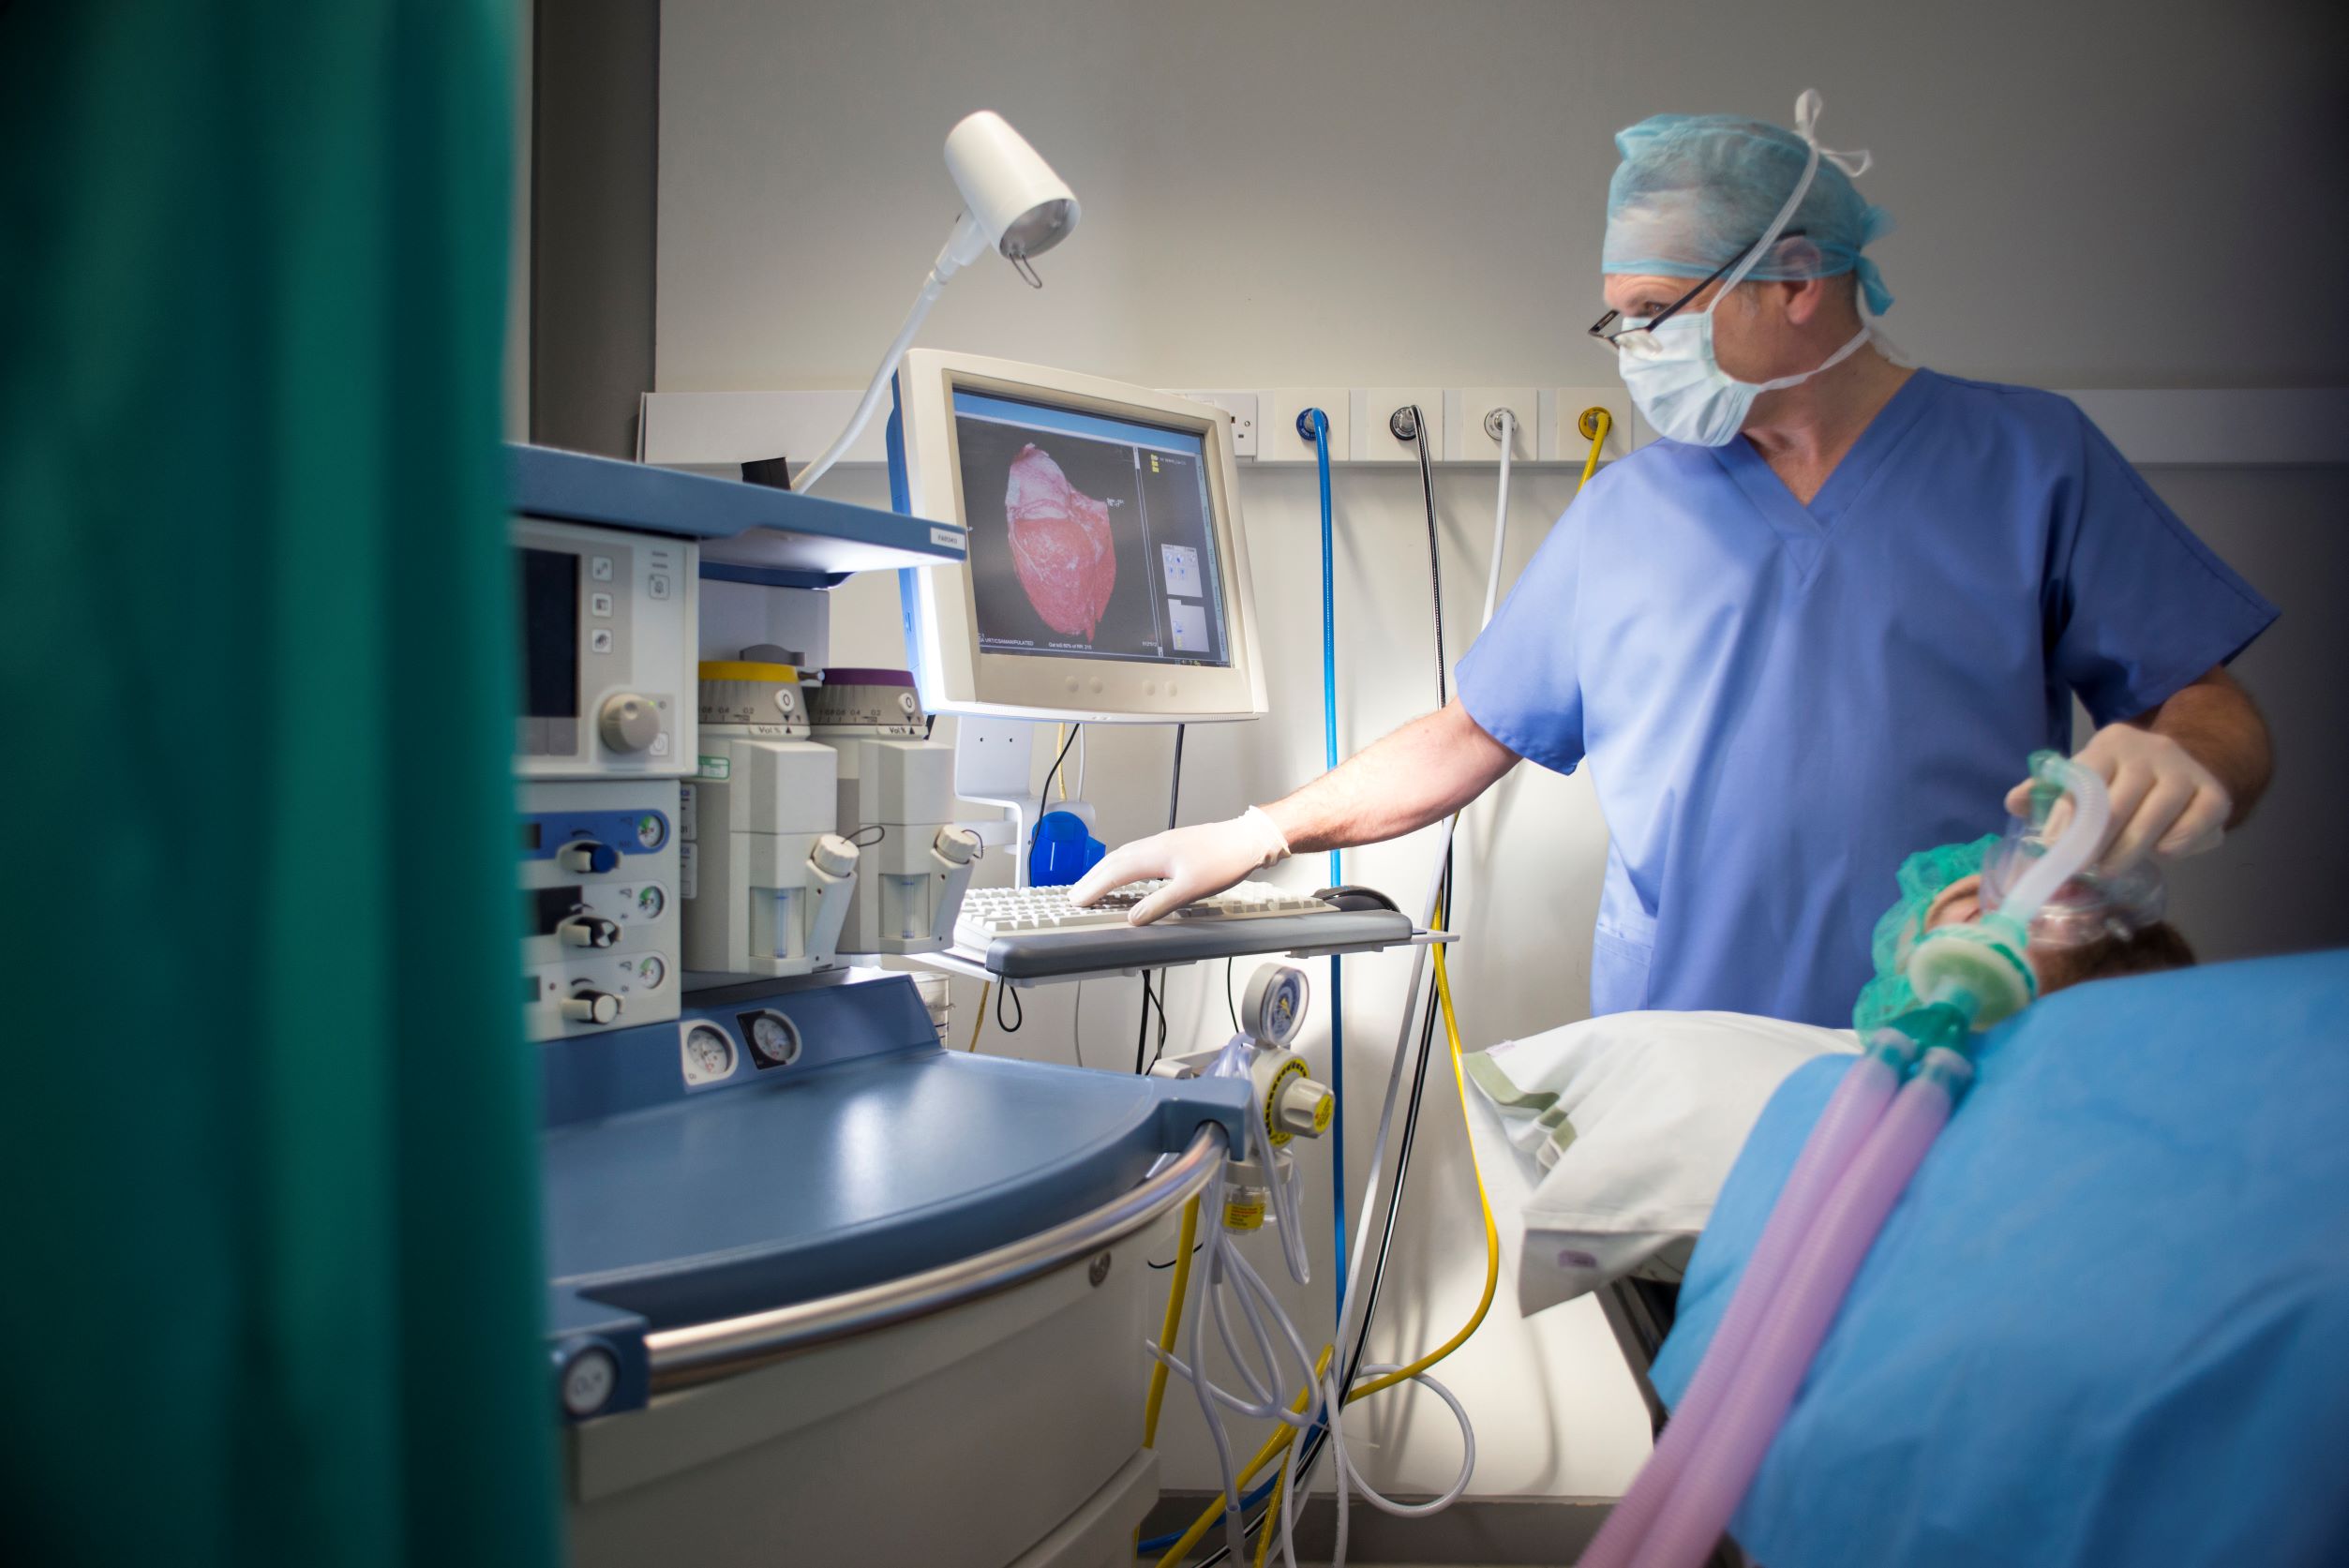 Partnering with an anesthesiology company in Michigan offers many benefits for an ambulatory surgery center, as represented by this image of an anesthesiologist with a patient.